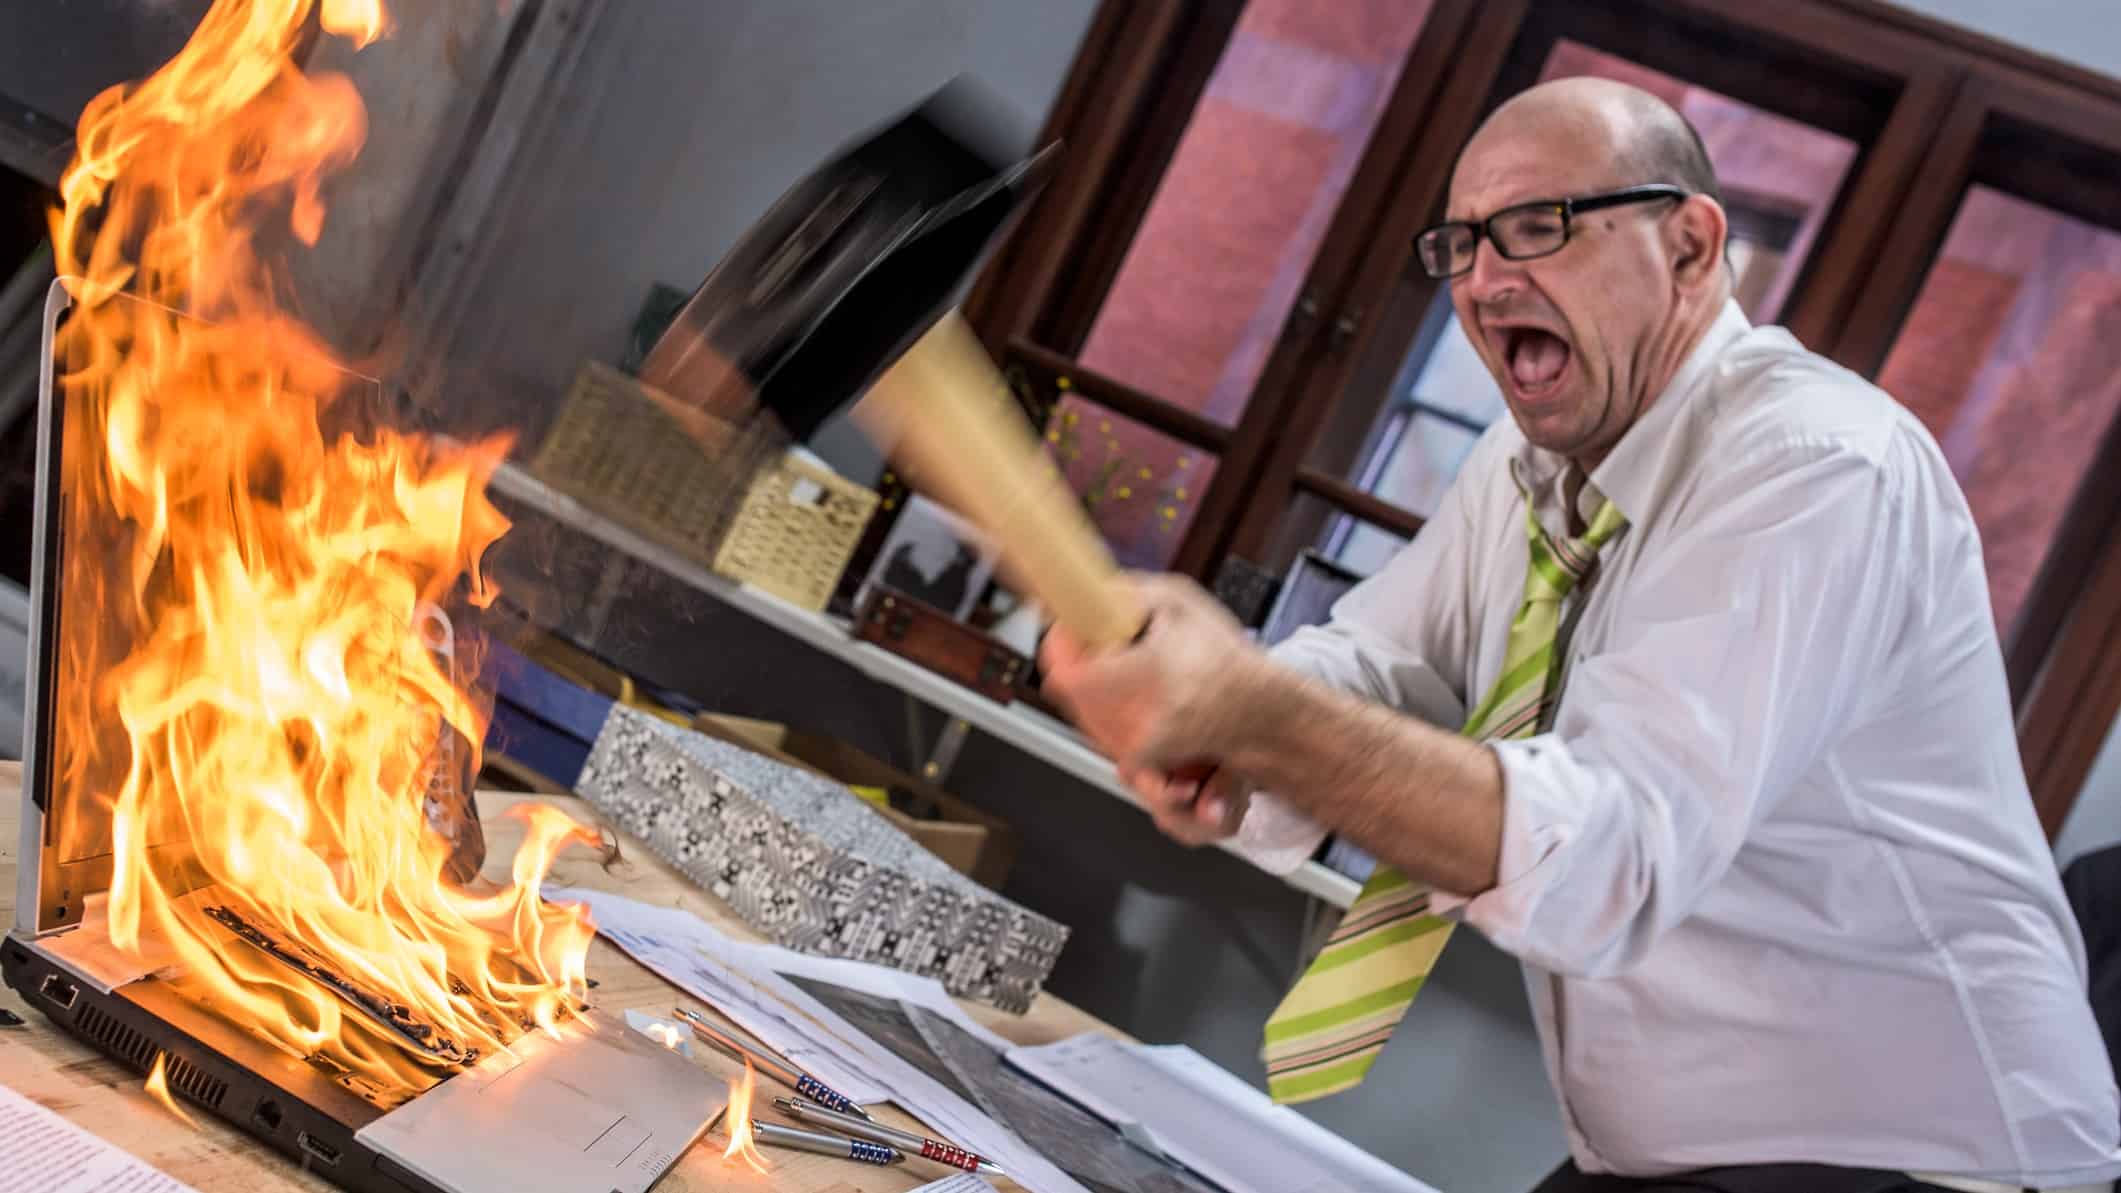 A businessman smashes his laptop with a hammer because it is on fire.